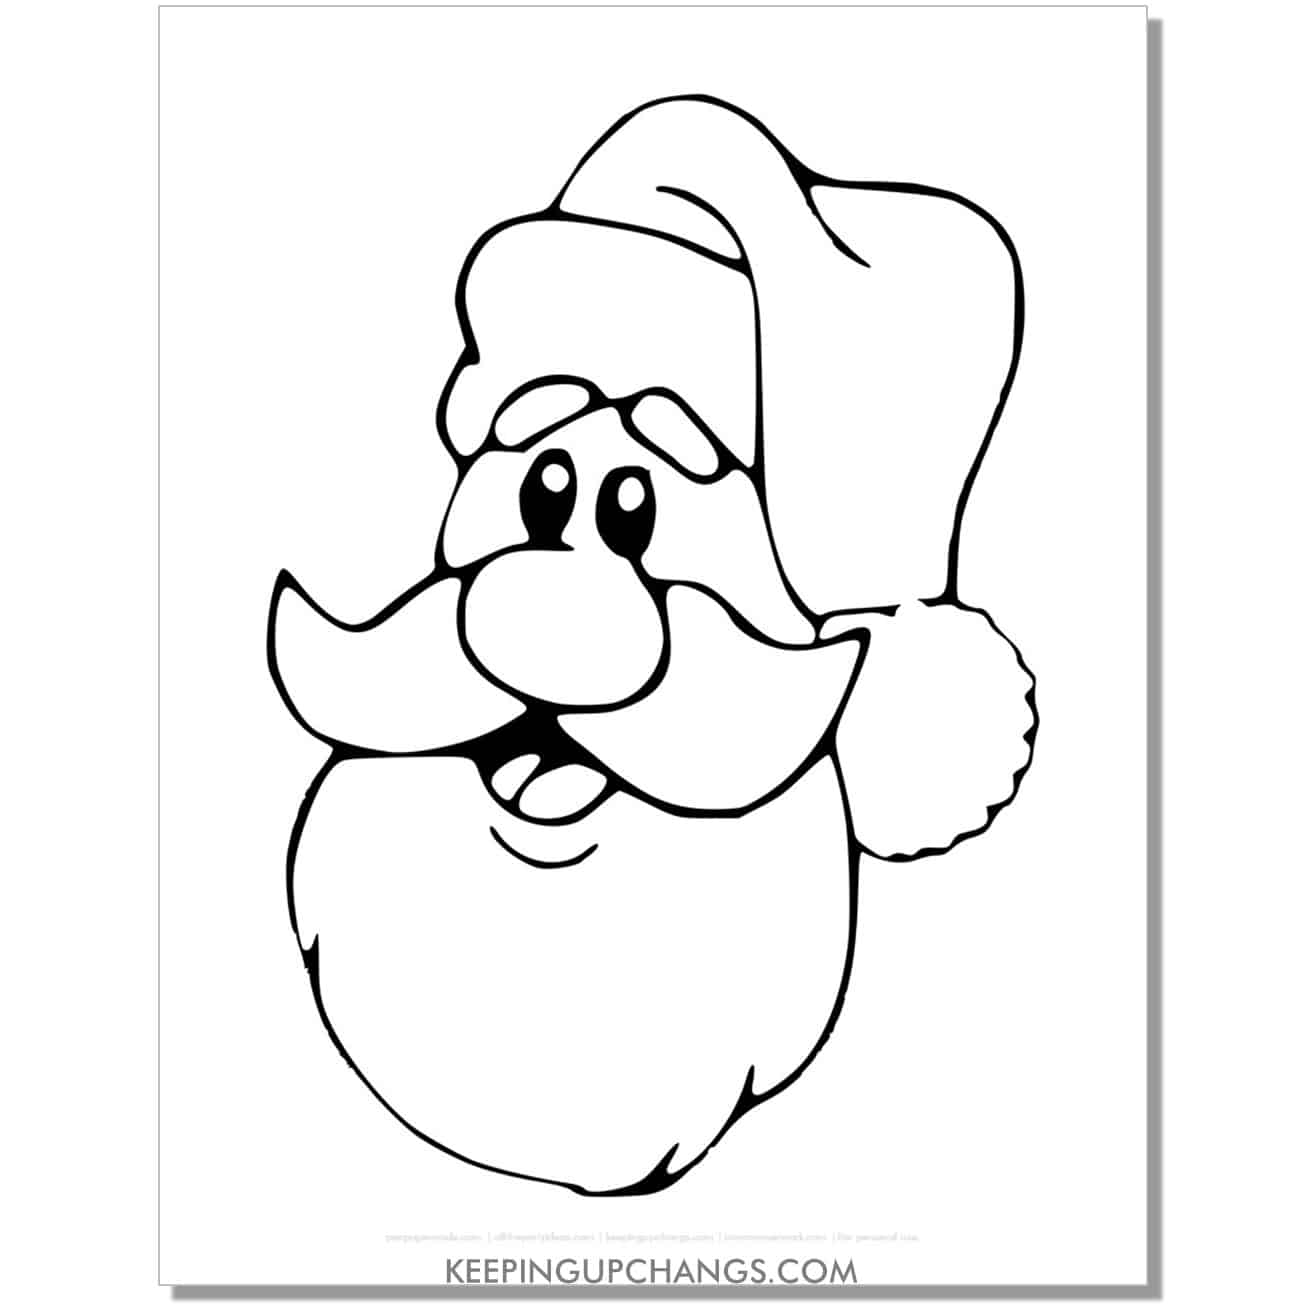 free santa face with large beard outline, template, cut out, coloring page.